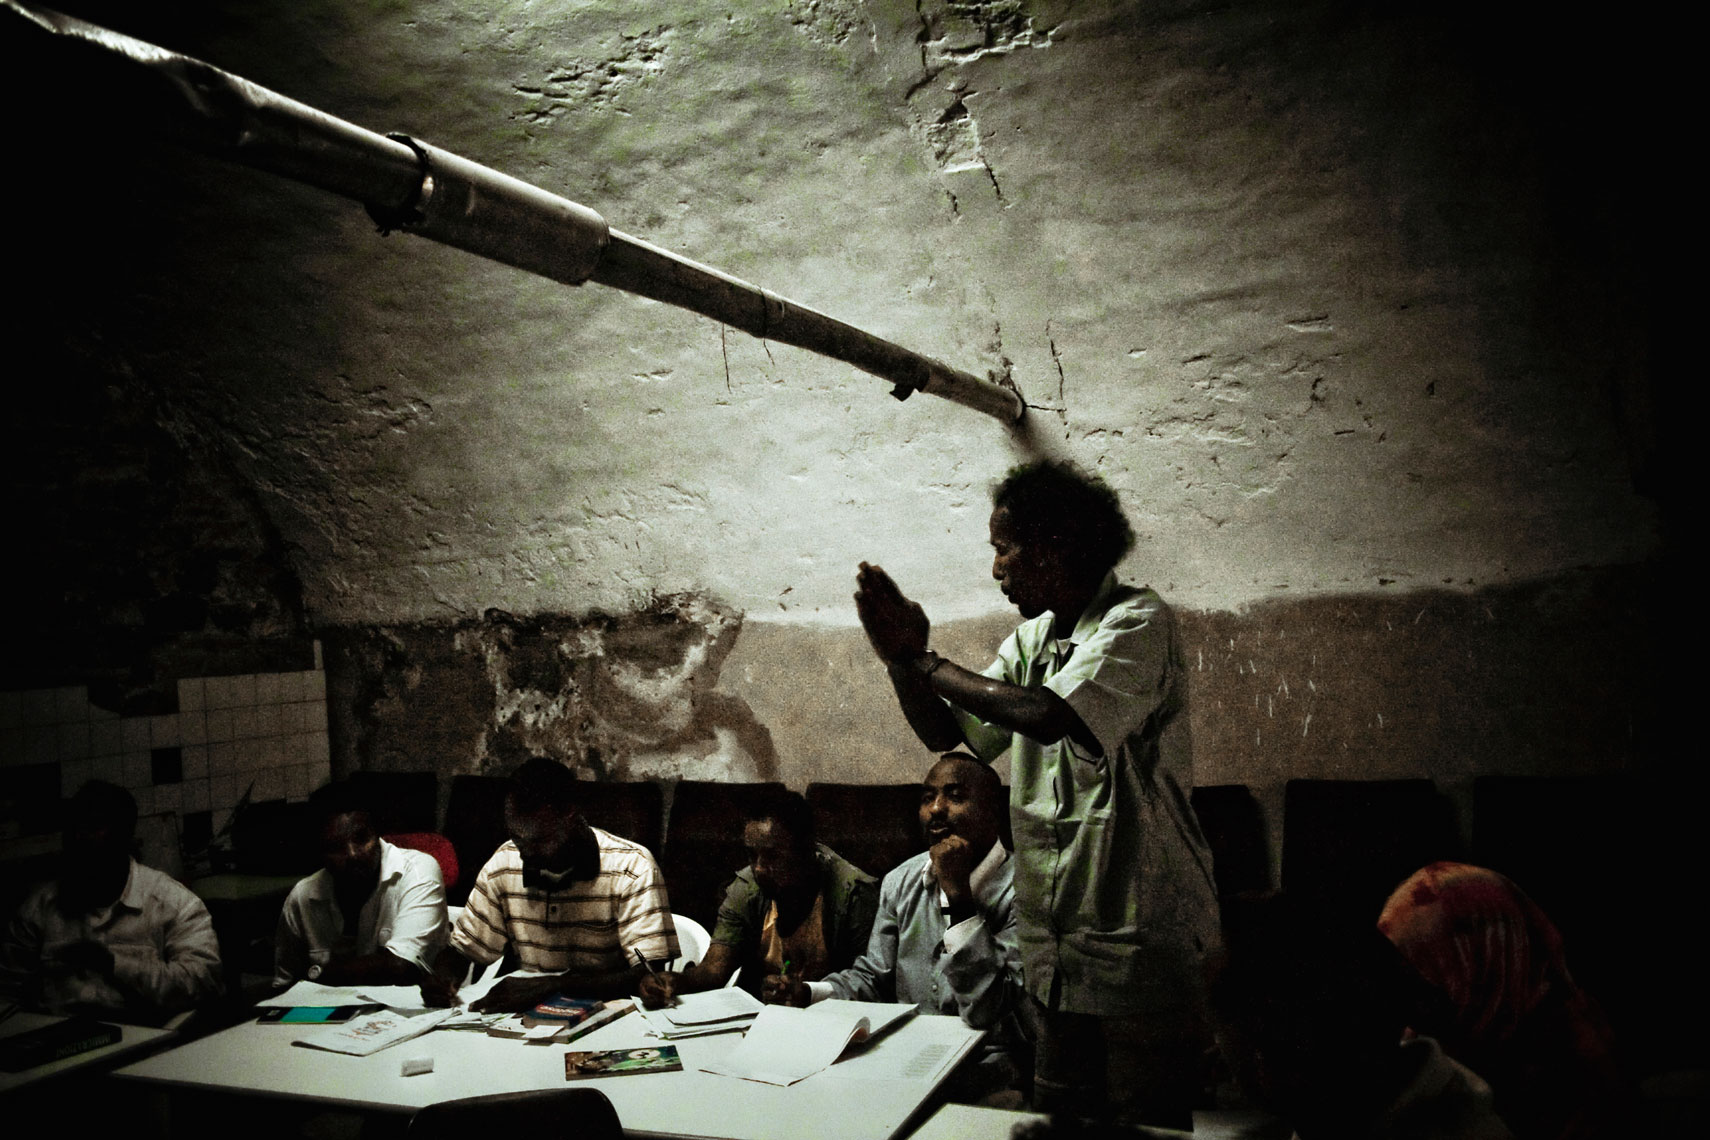 ITALY. Florence, 21st July 2009. Somali refugees attend to an Italian lessons run by some volunteers inside the "Kulanka" building. "Kulanka" (assembly in Somali language) is a former warehouse near the railways, occupied in 2008 by a group of Somali refugees together with an association that helps people without home, and gave,  in 2009 , for free temporary loan for use to an association of refugees, in according to a deal signed together with the city mayor.